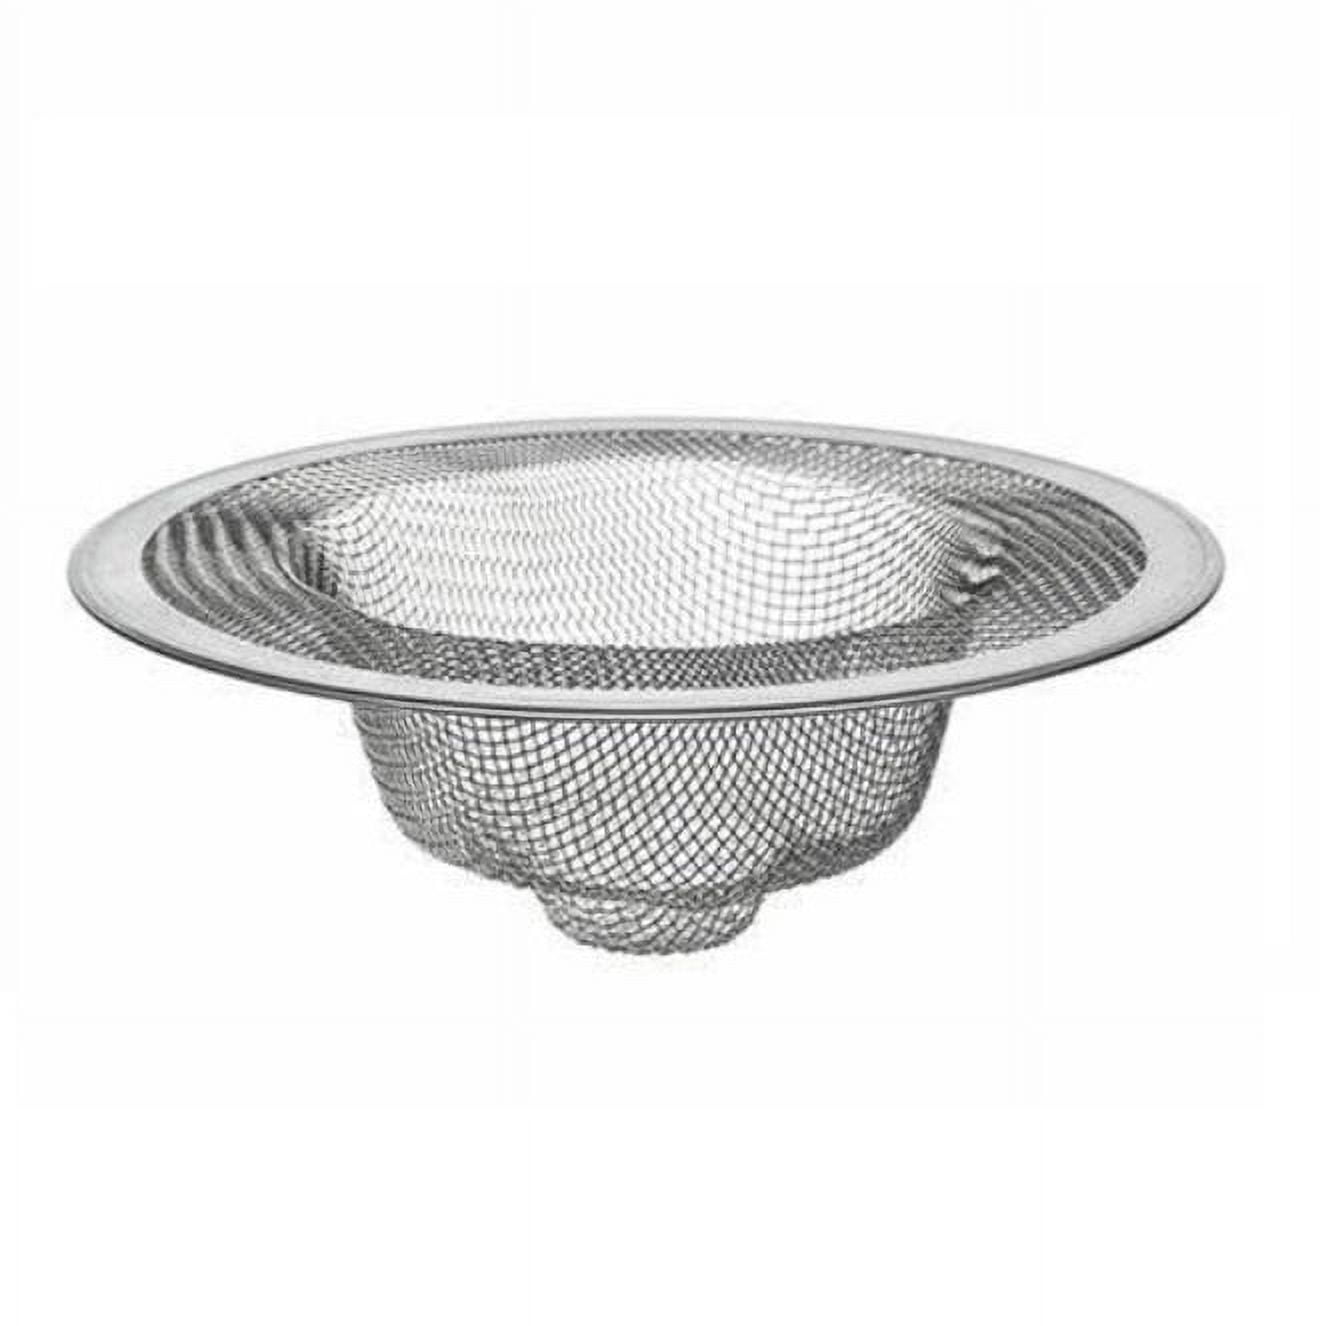 Kitchen Sink Stainless Sink Strainer With Handle Premium Stainless Steel Sink  Garbage Disposal Stopper Mesh Basket Drain Filter From Dianz, $0.82